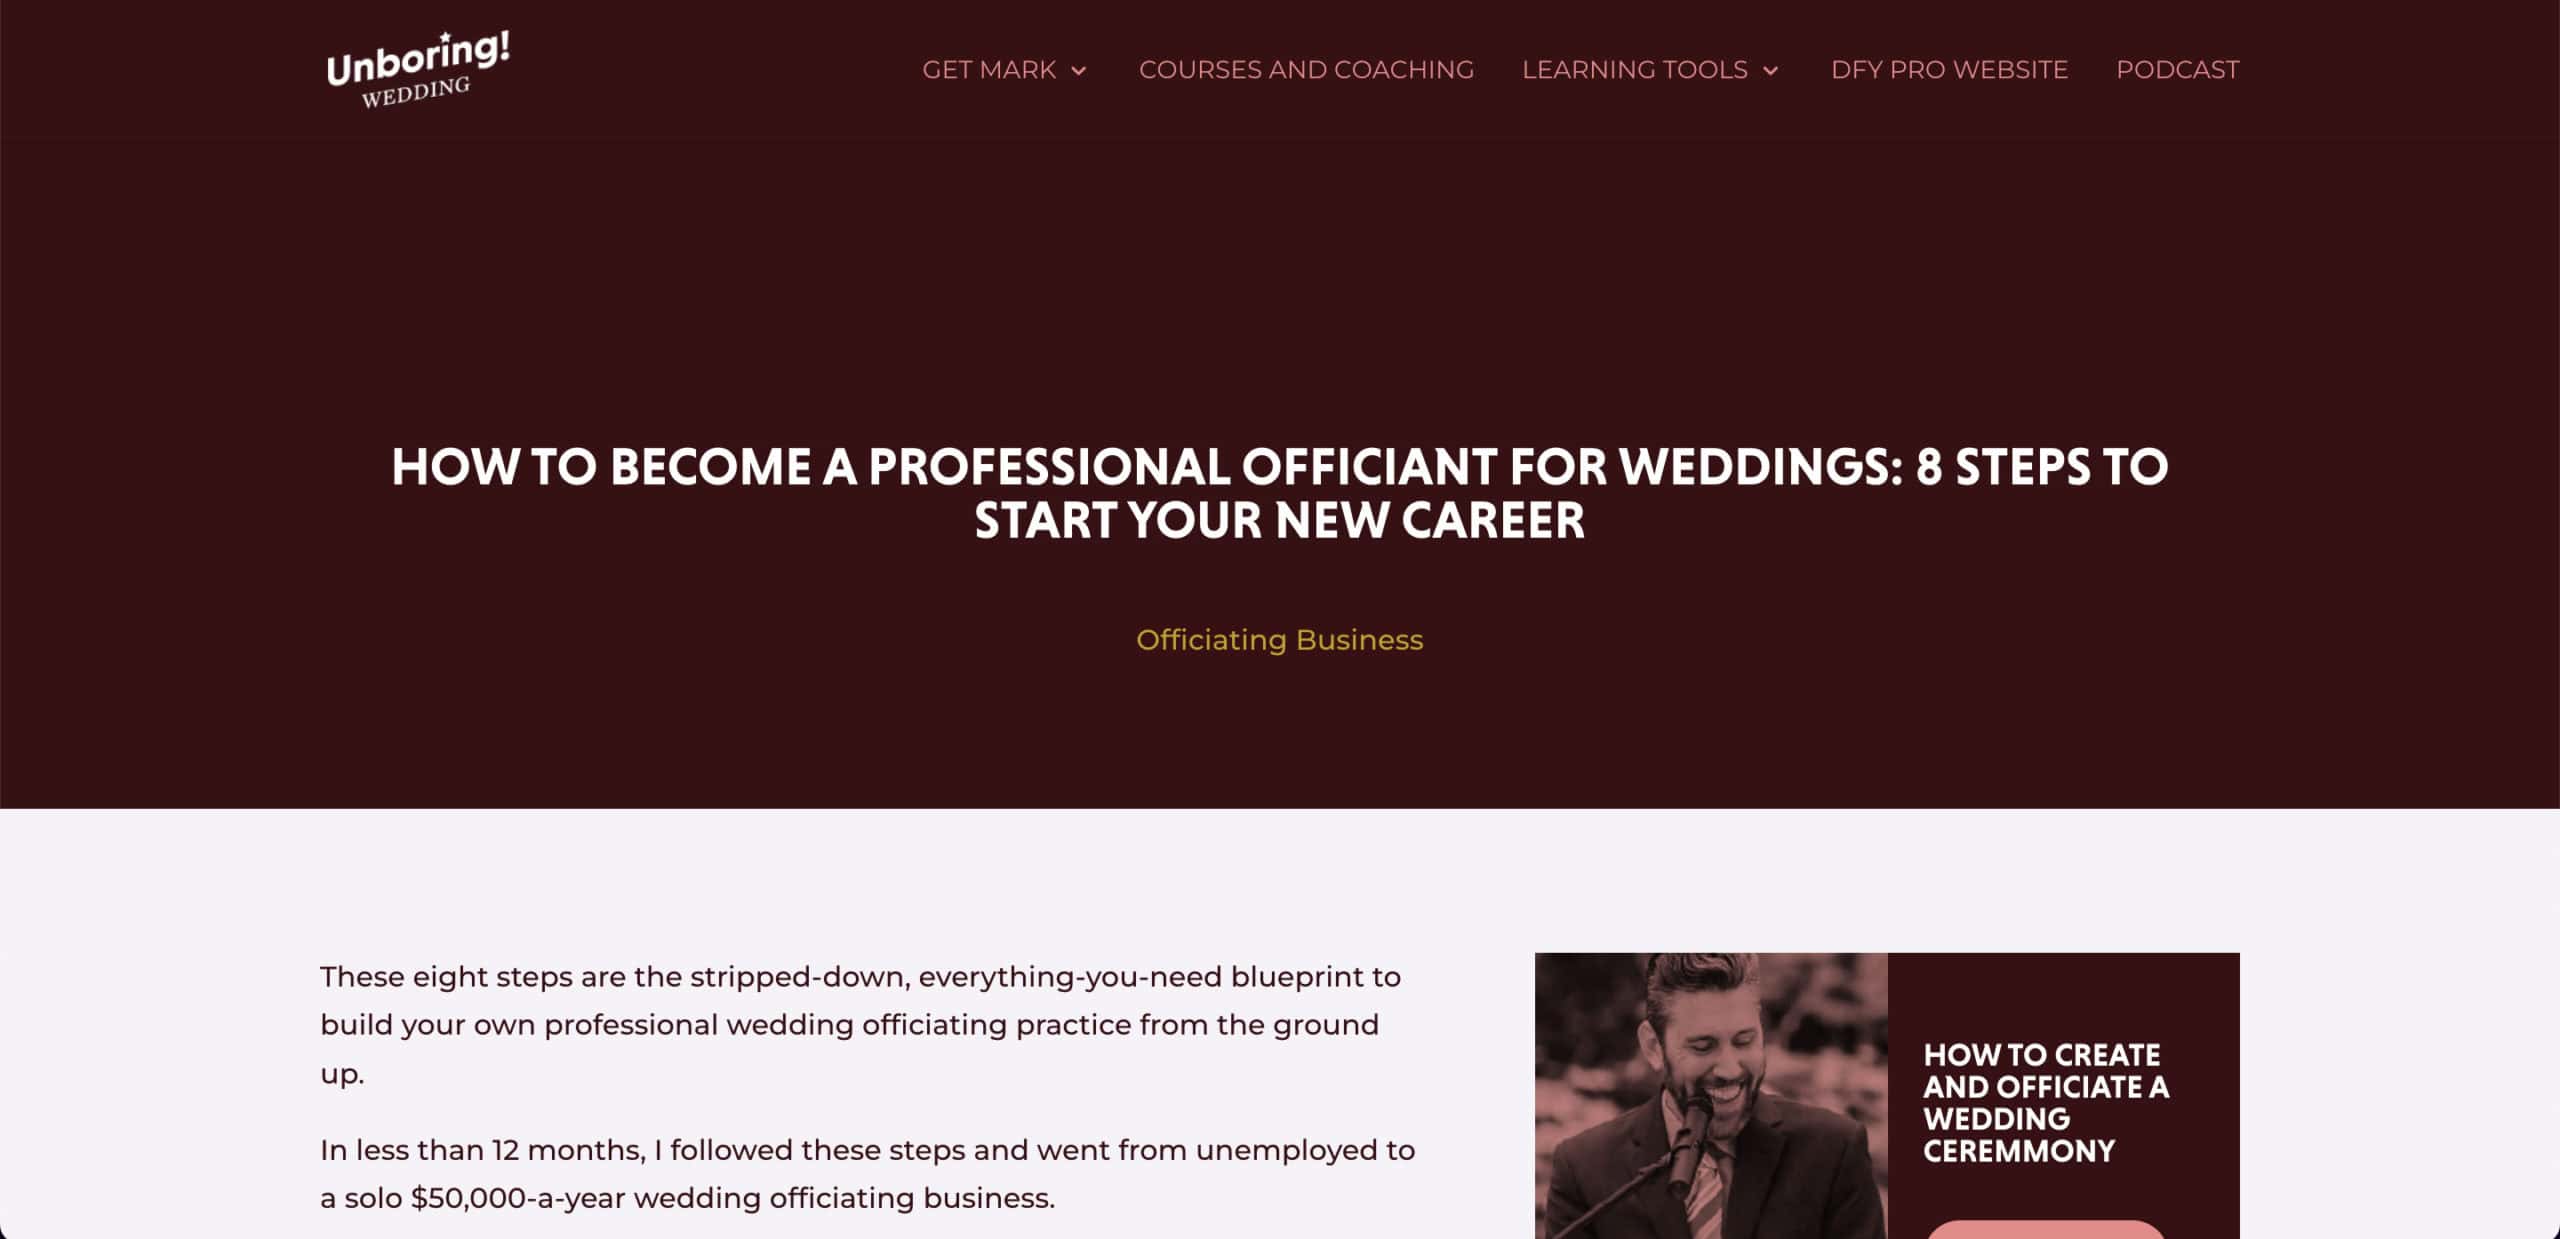 How To Become A Pro Wedding Officiant - The 7 Things You Need To